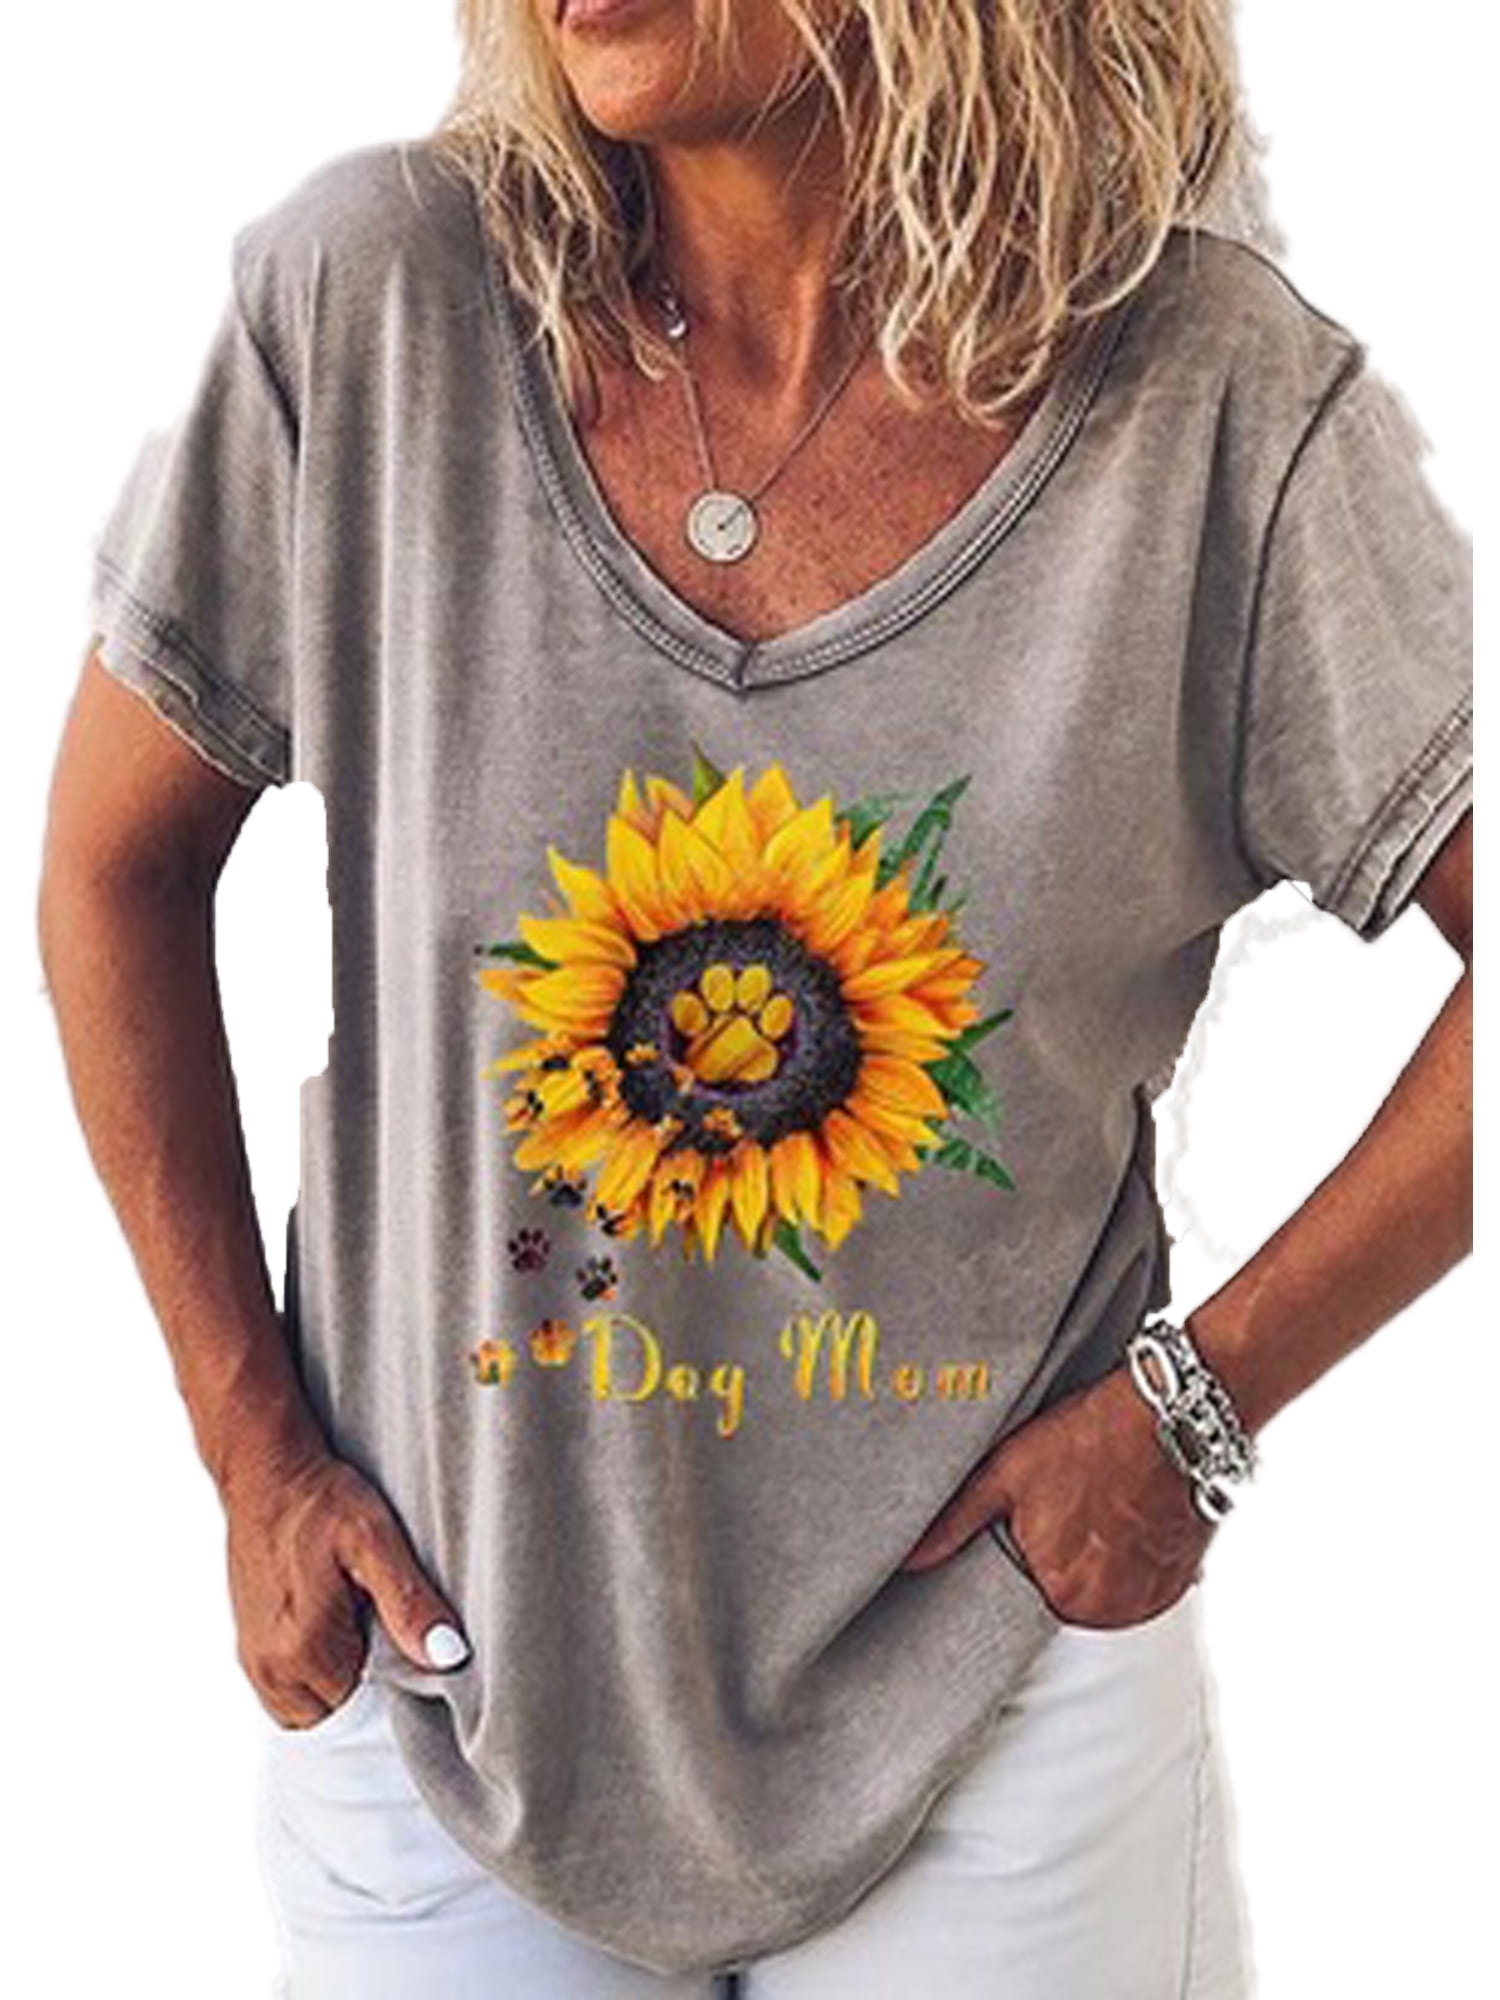 Summer Tops for Women Casual Short Sleeve Loose Fit Sunflower Graphic Tees Vintage Shirts Blouses 